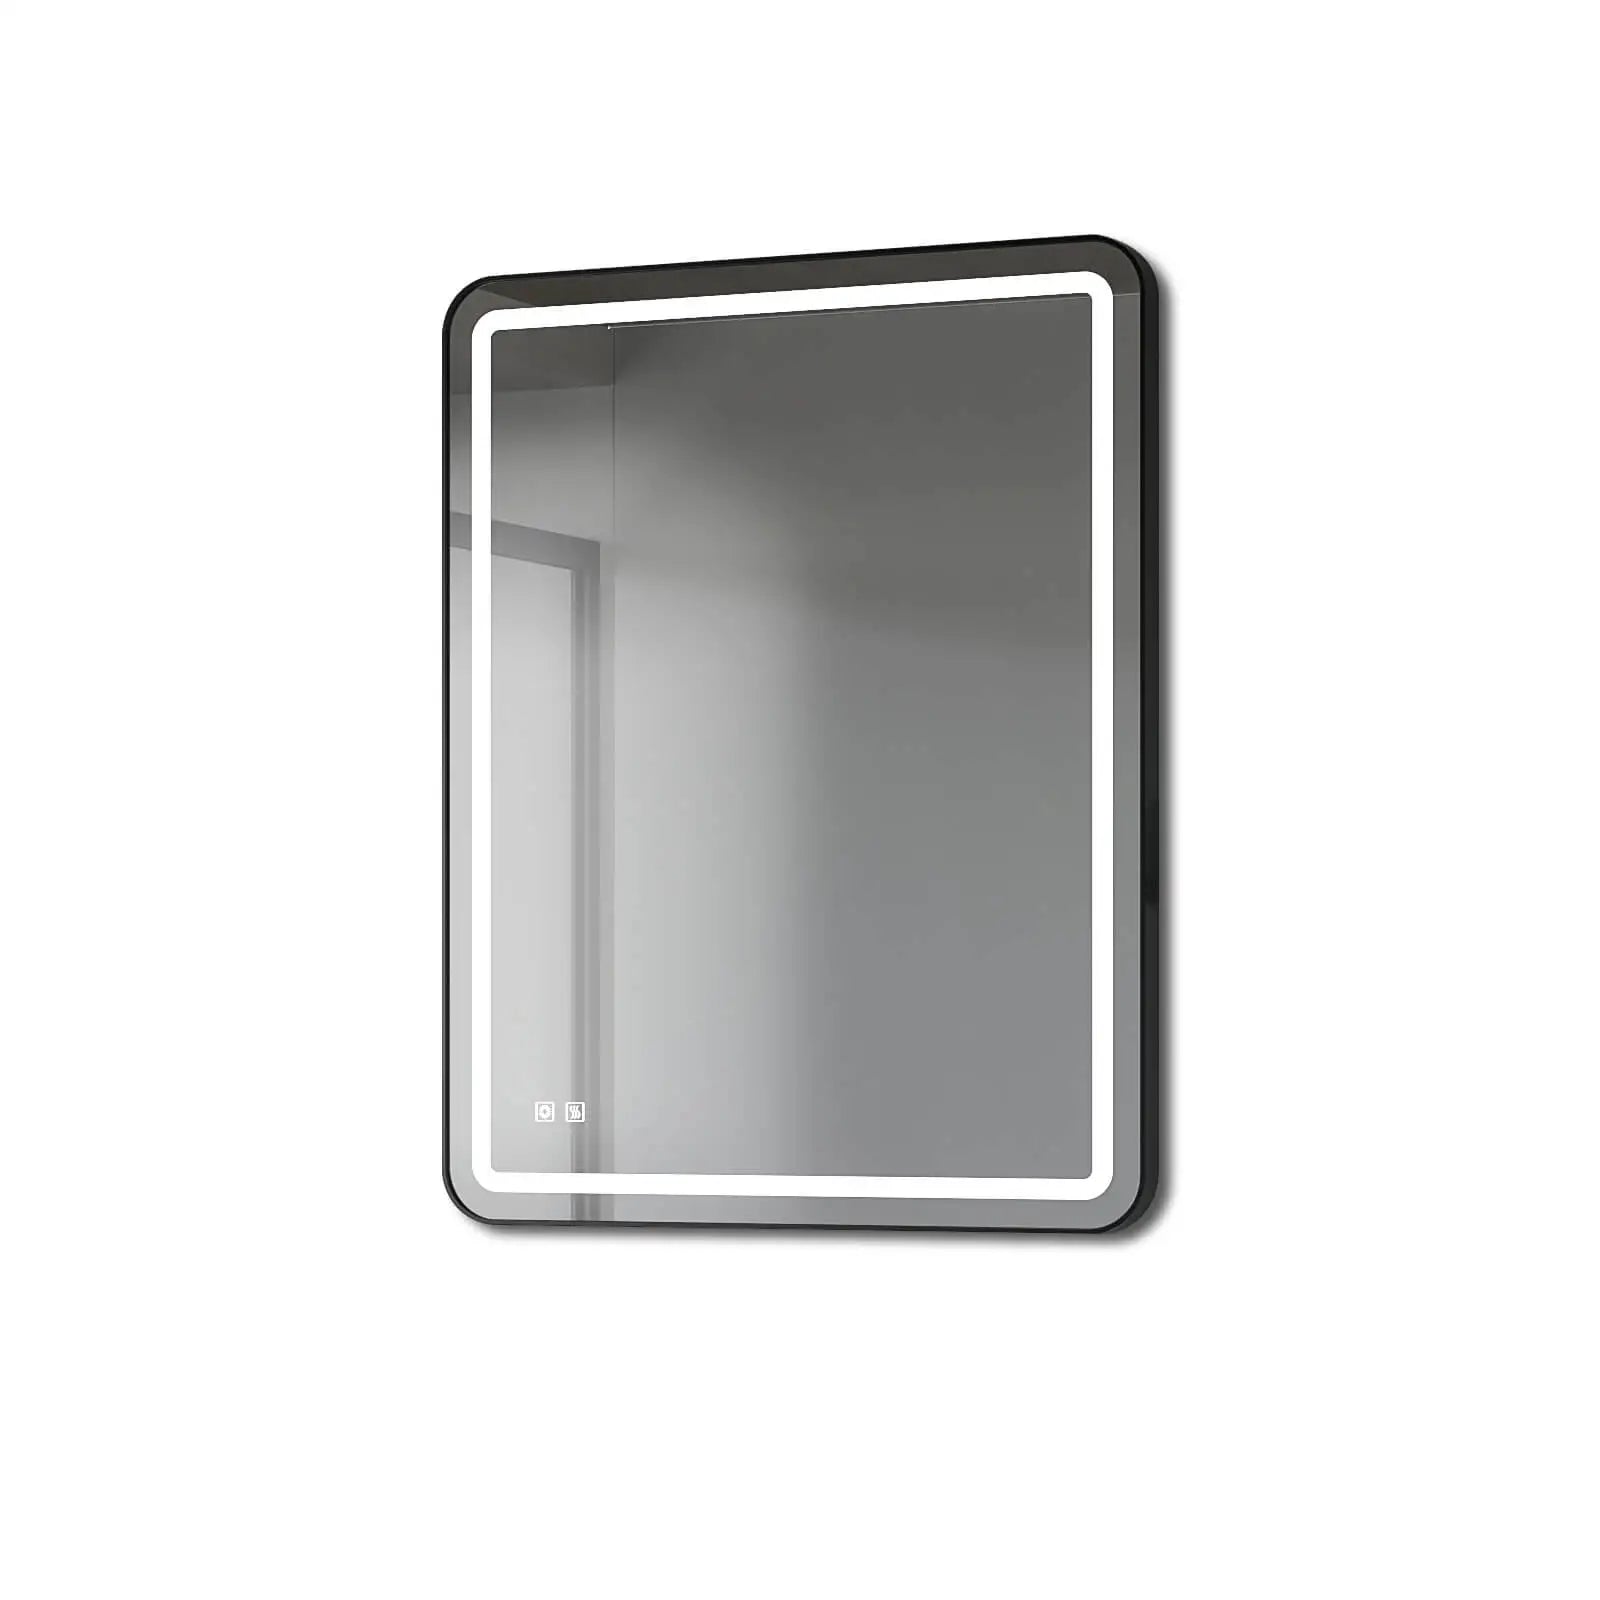 HOROW Metal Framed Mirror LED Mirror with 36x28 Inch Model HR-J3628S